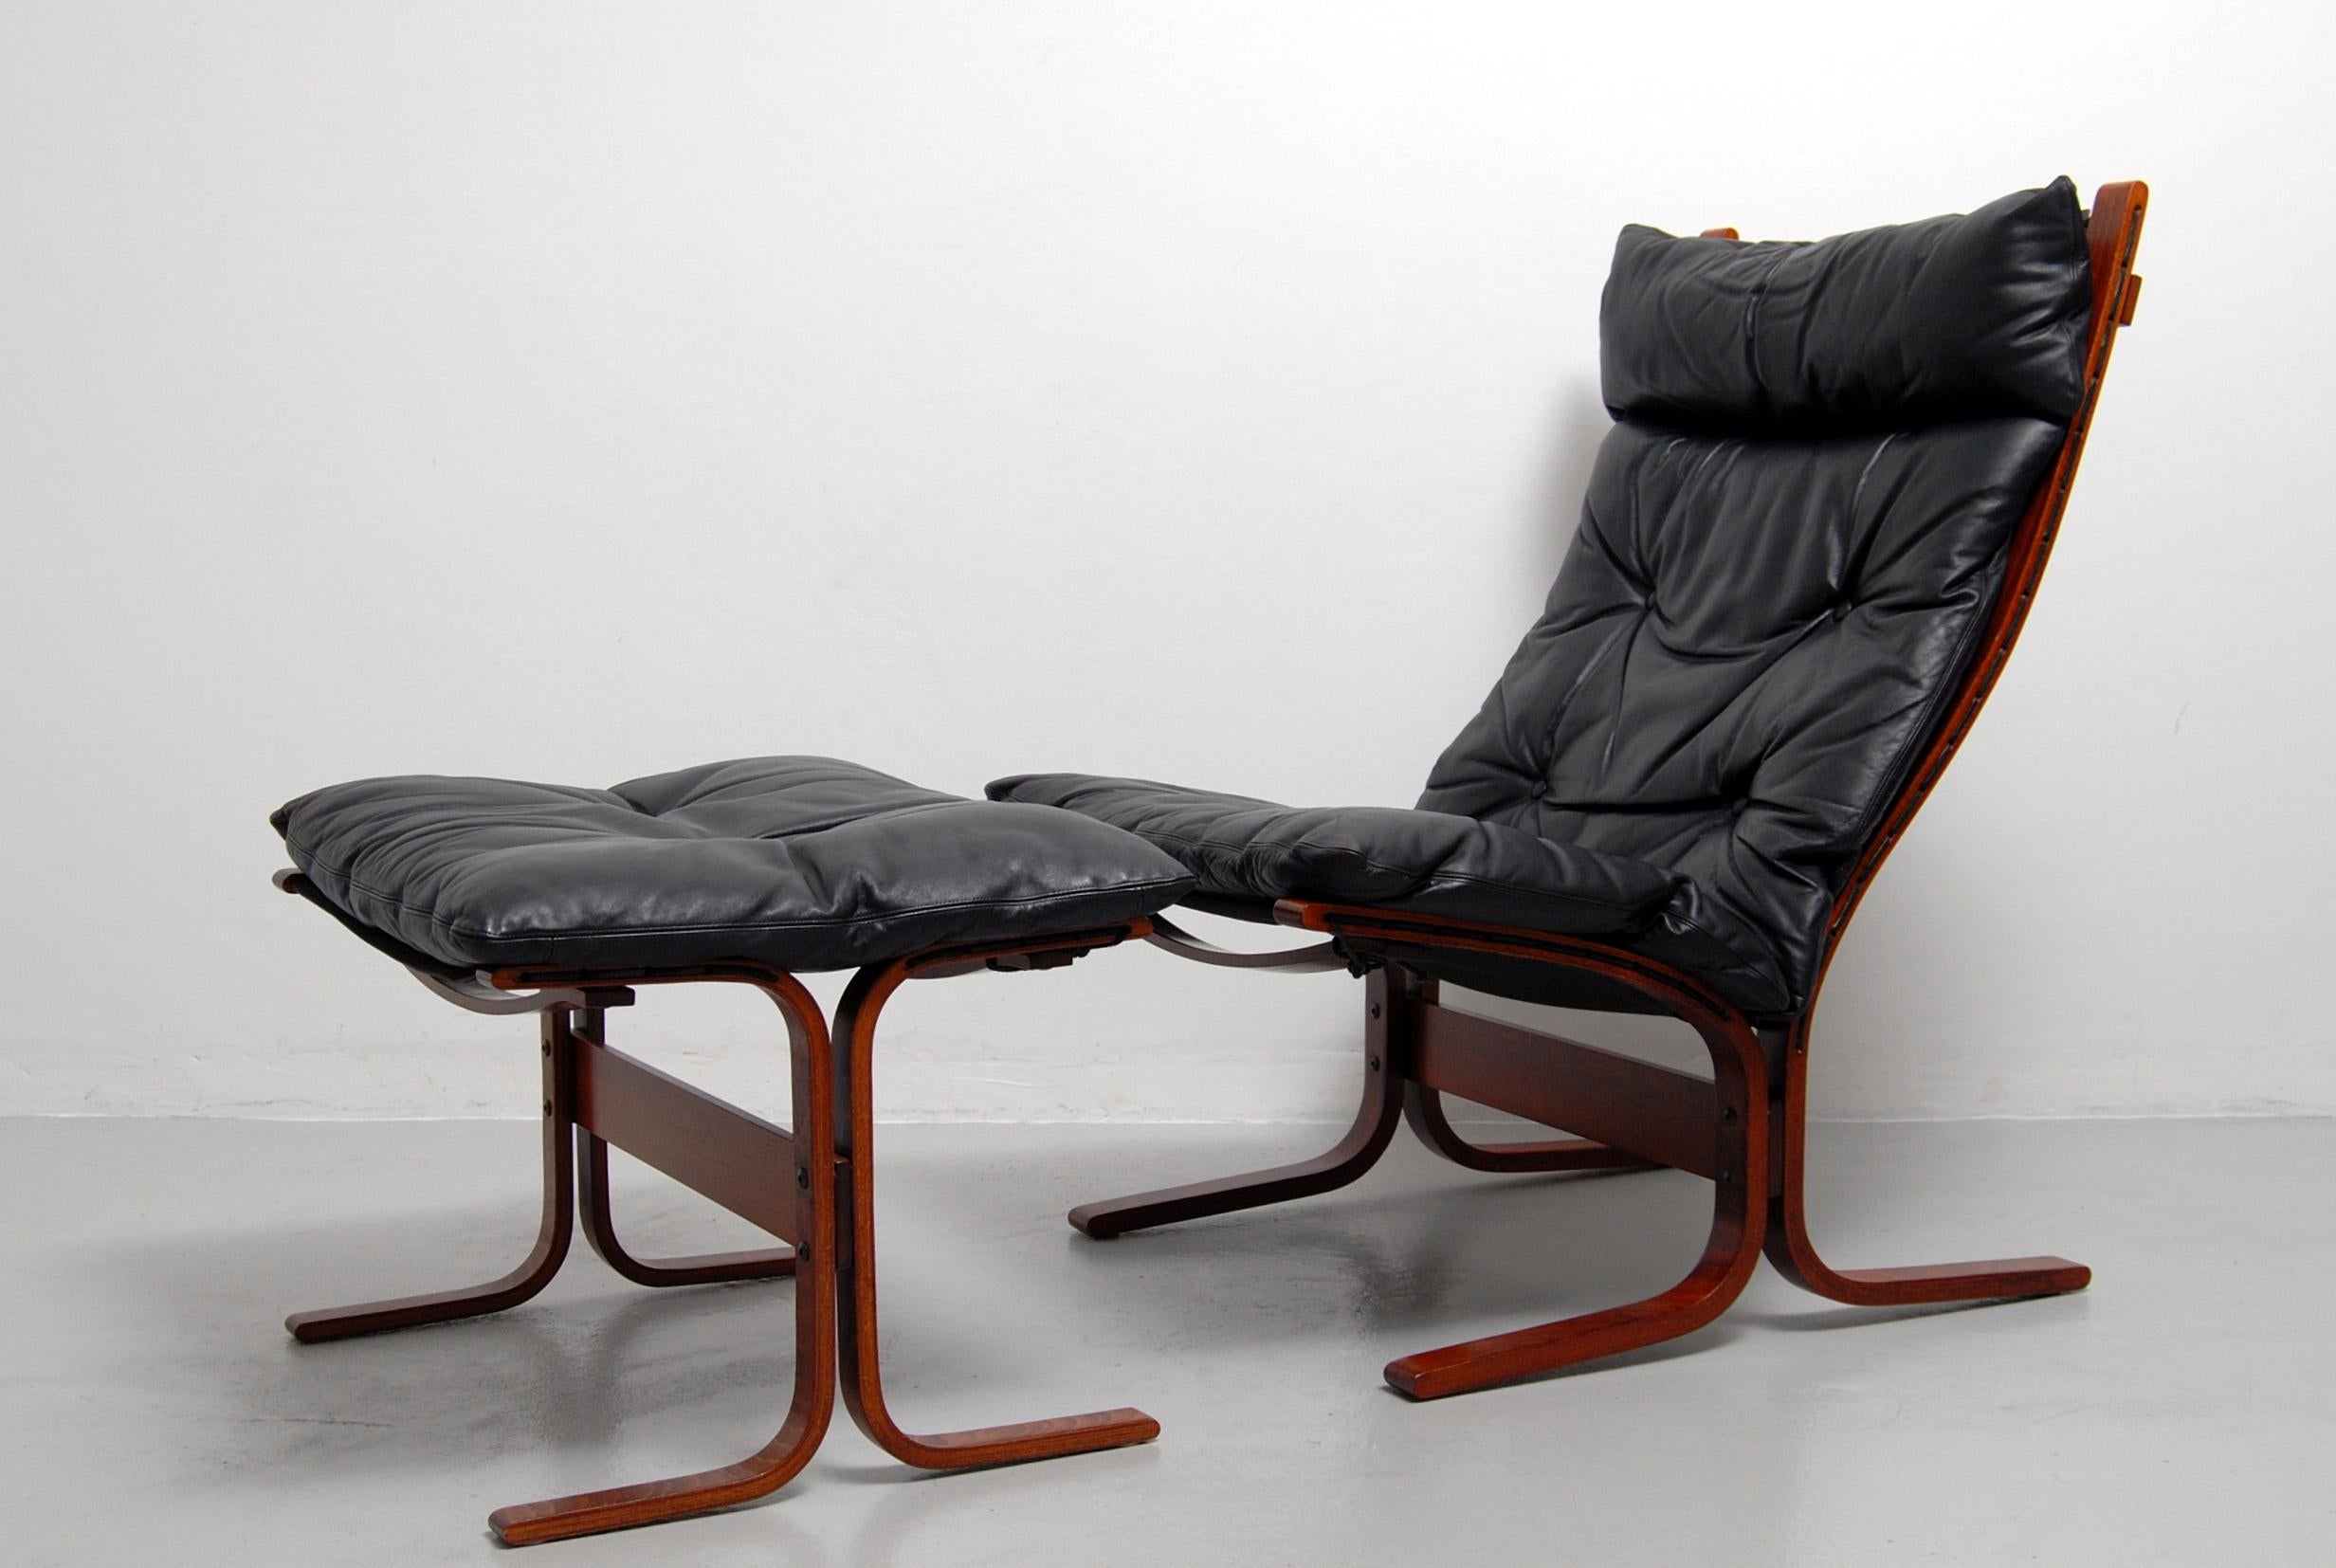 Siesta high back lounge chair and matching ottoman designed by Ingmar Relling and made in Norway by Westnofa. This award winning chair and ottoman has a bentwood frame with a black leather cushion that sits on a canvas sling. Labelled with Westnofa